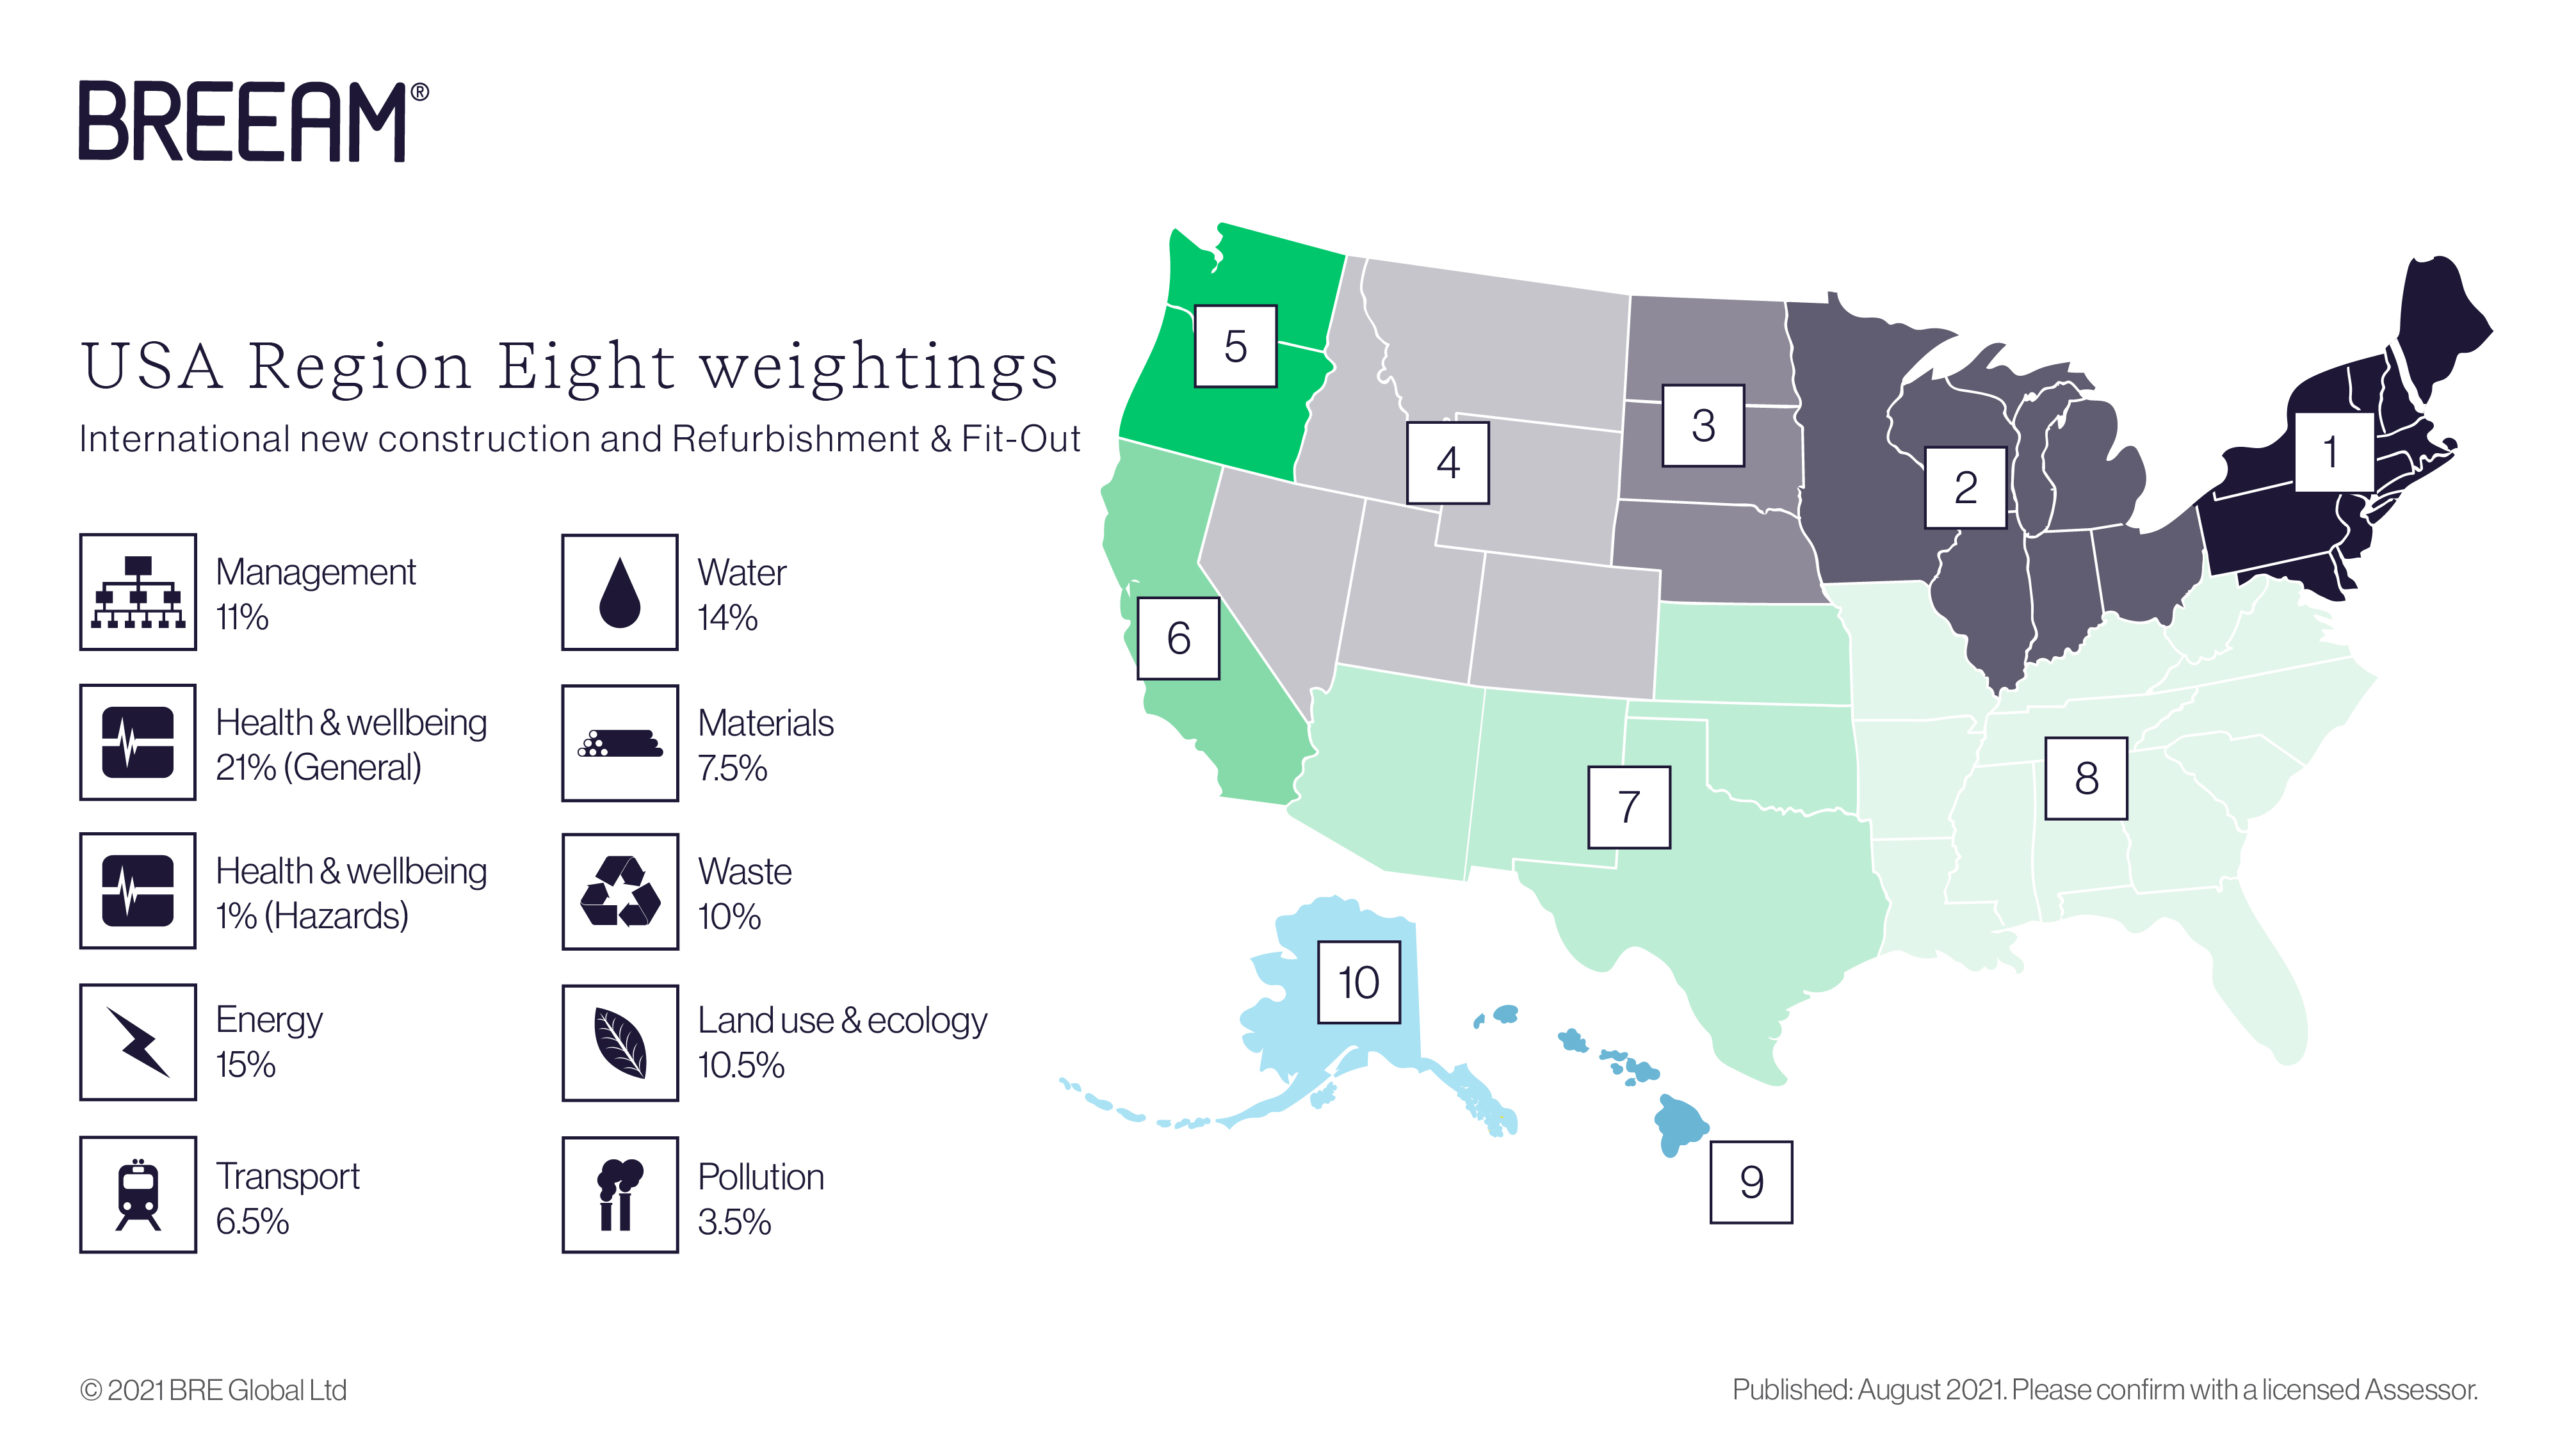 Weightings for USA Region Eight